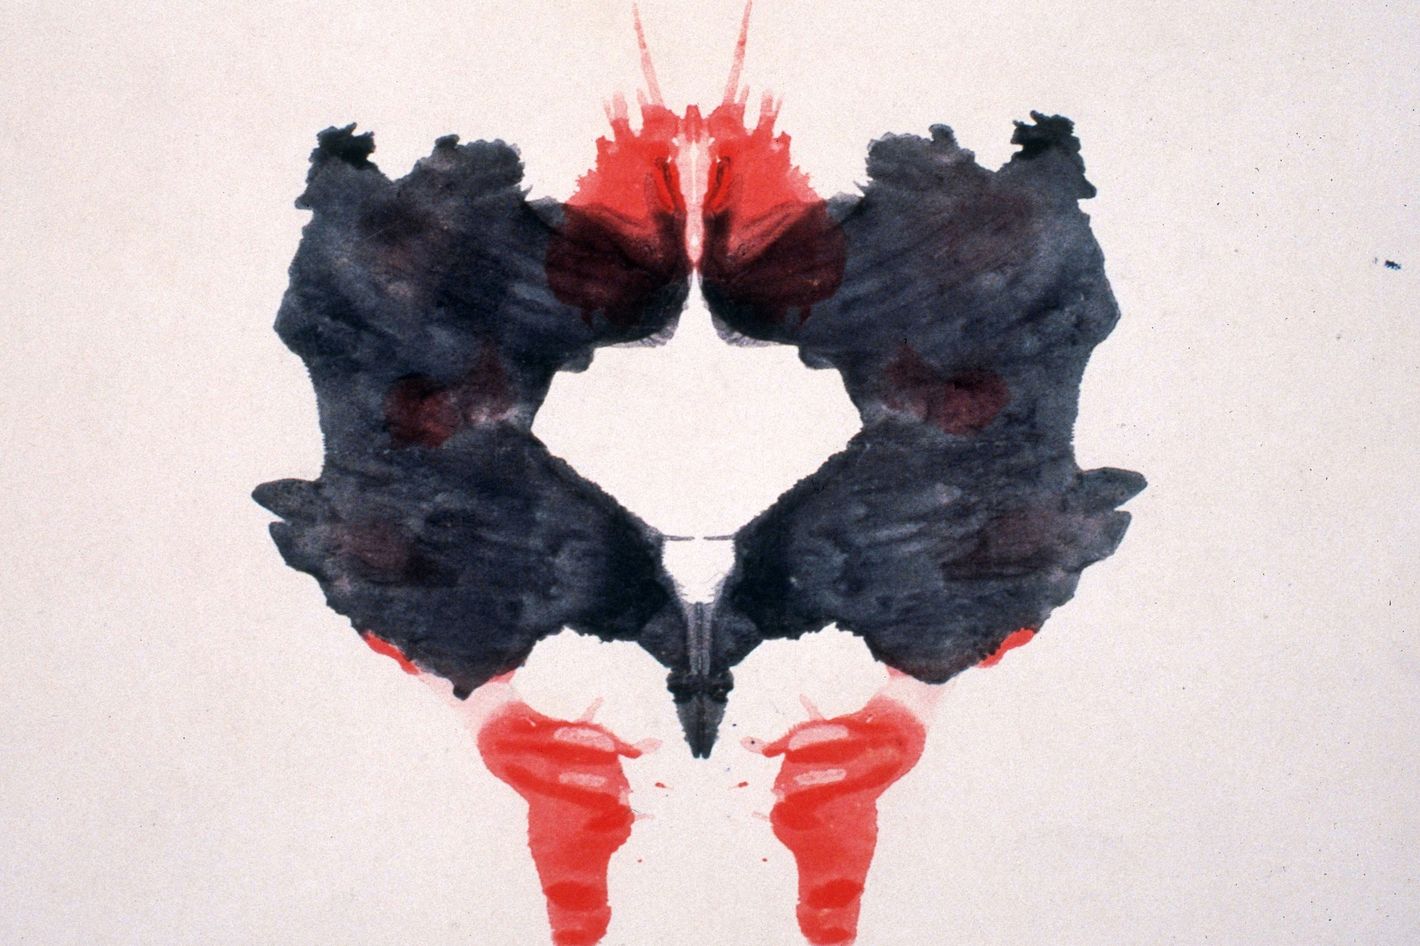 Rorschach and the Power of Perception